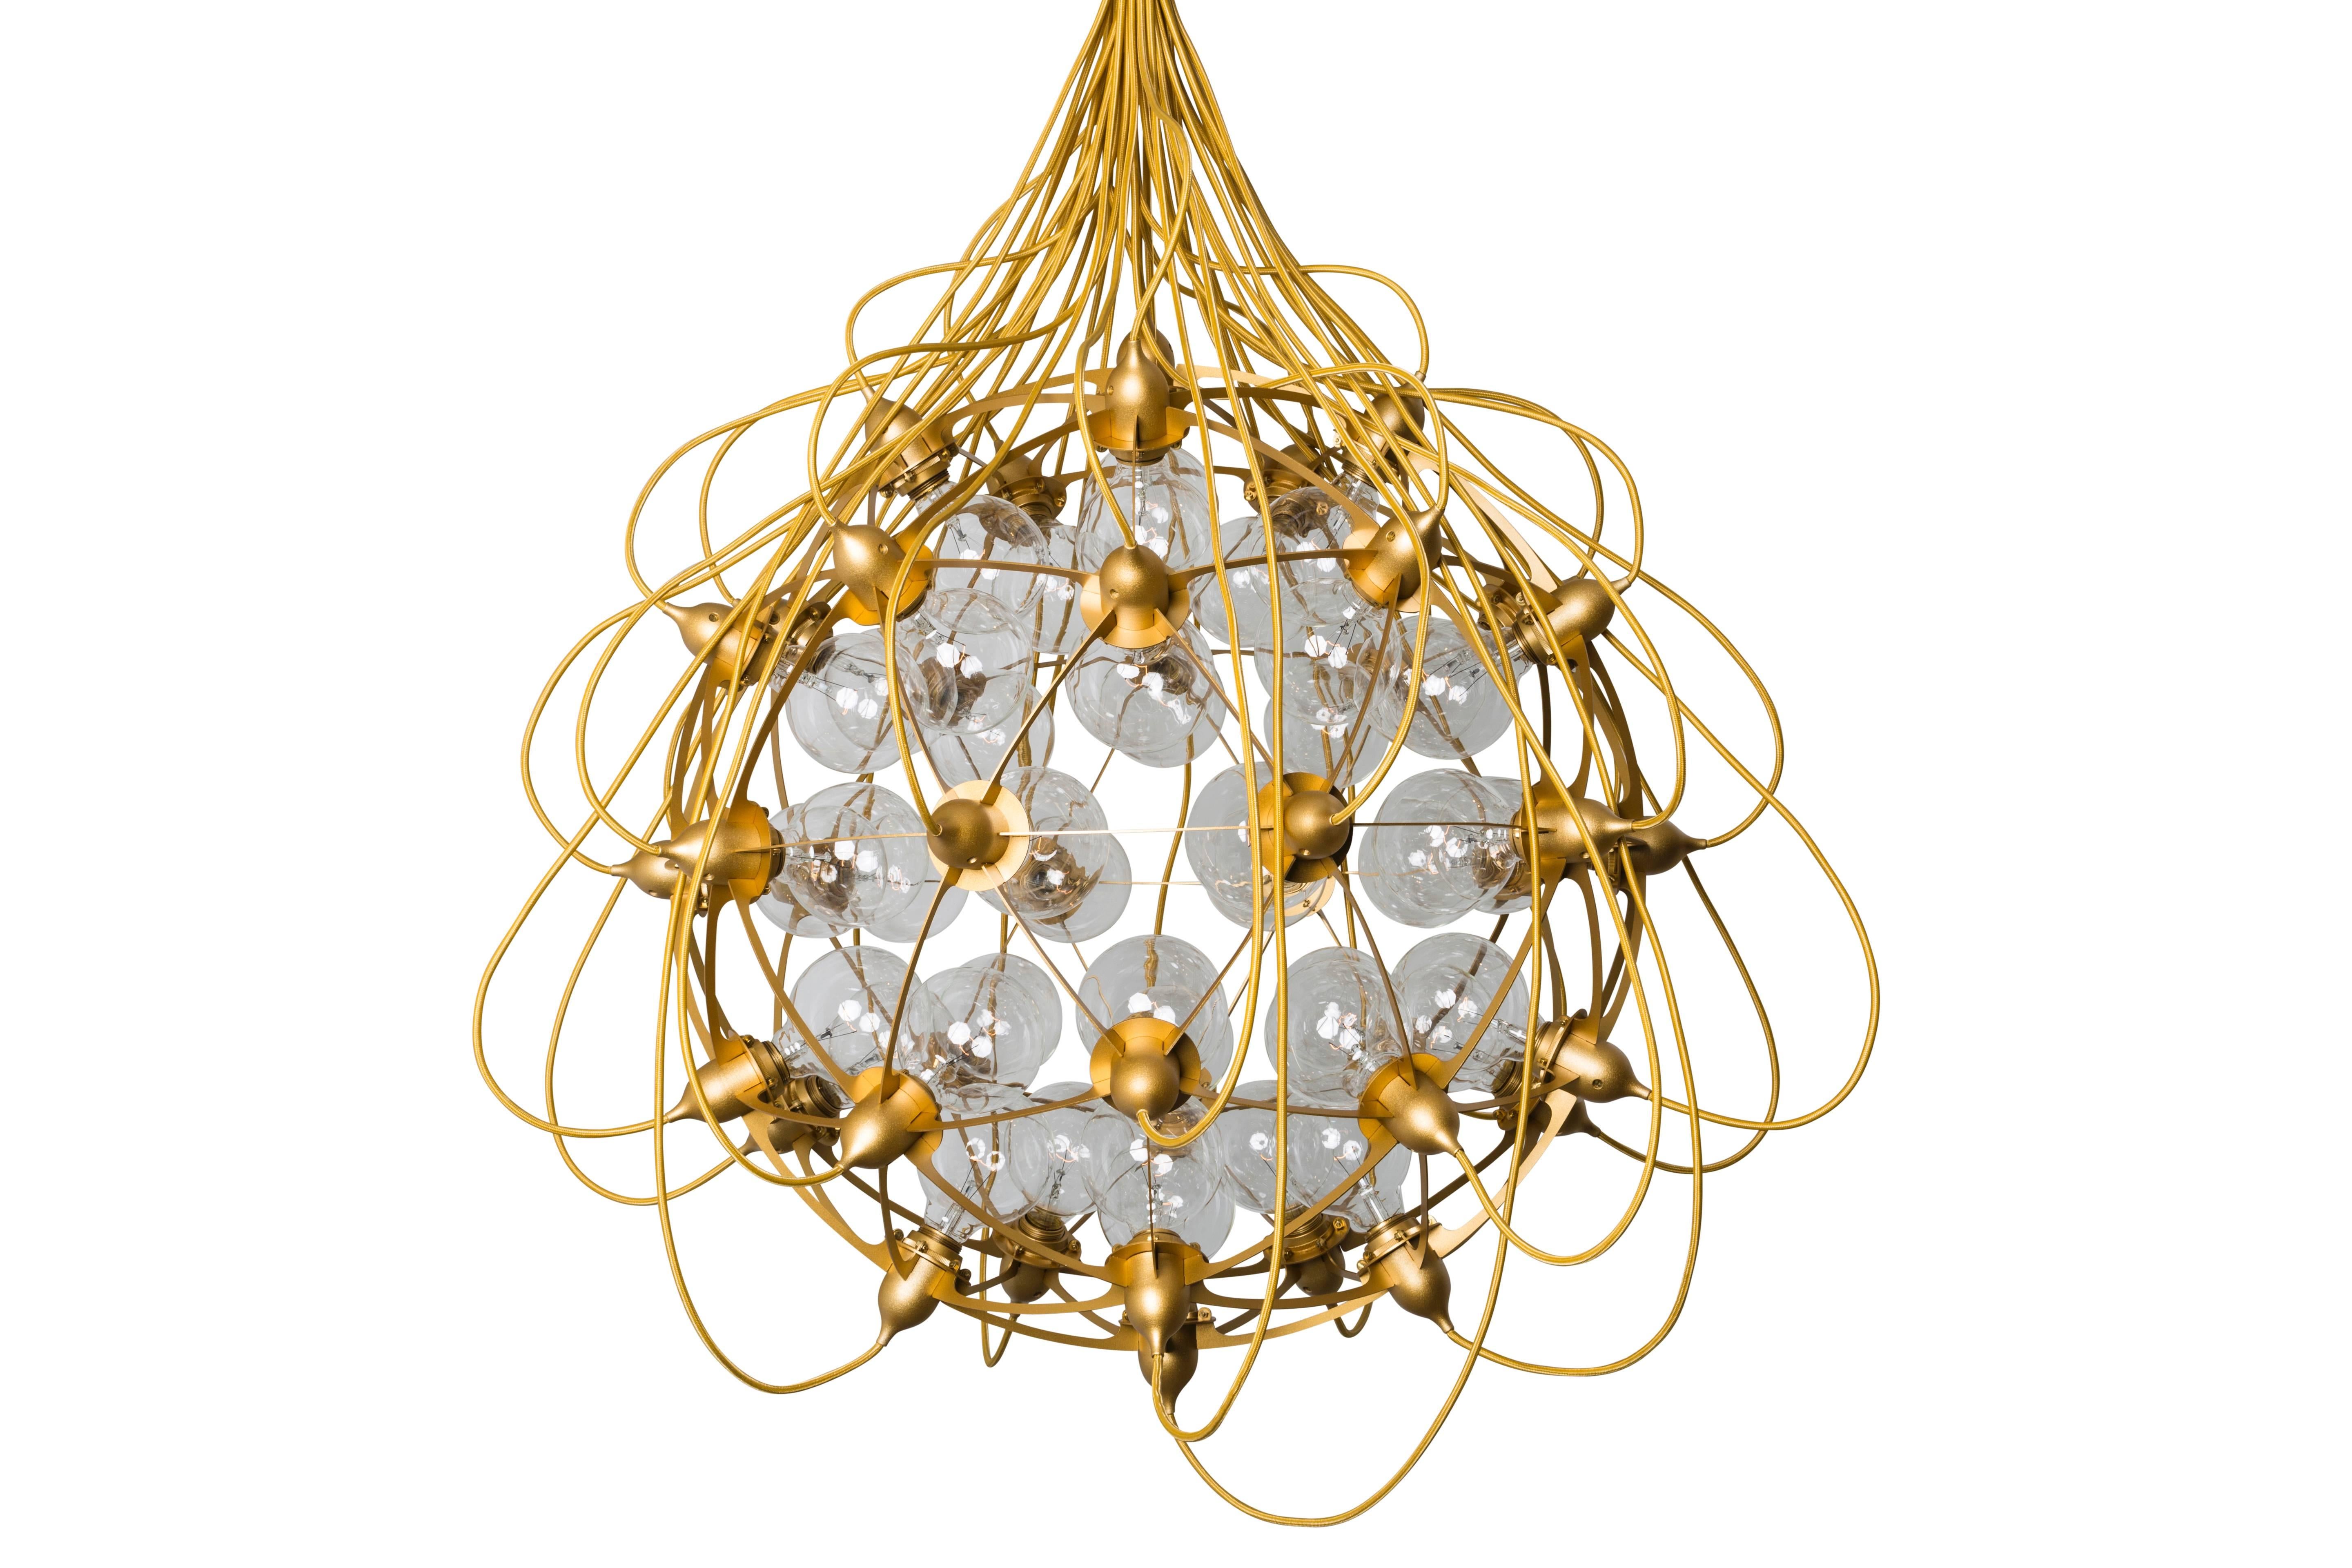 As its name suggests, “The Birth Gold” lamp is inspired by a moment of conception, specifically the moment when the sperm fertilizes an egg. The chandelier is inspired by the delicate electrical current emitted at the moment of fertilization. Its